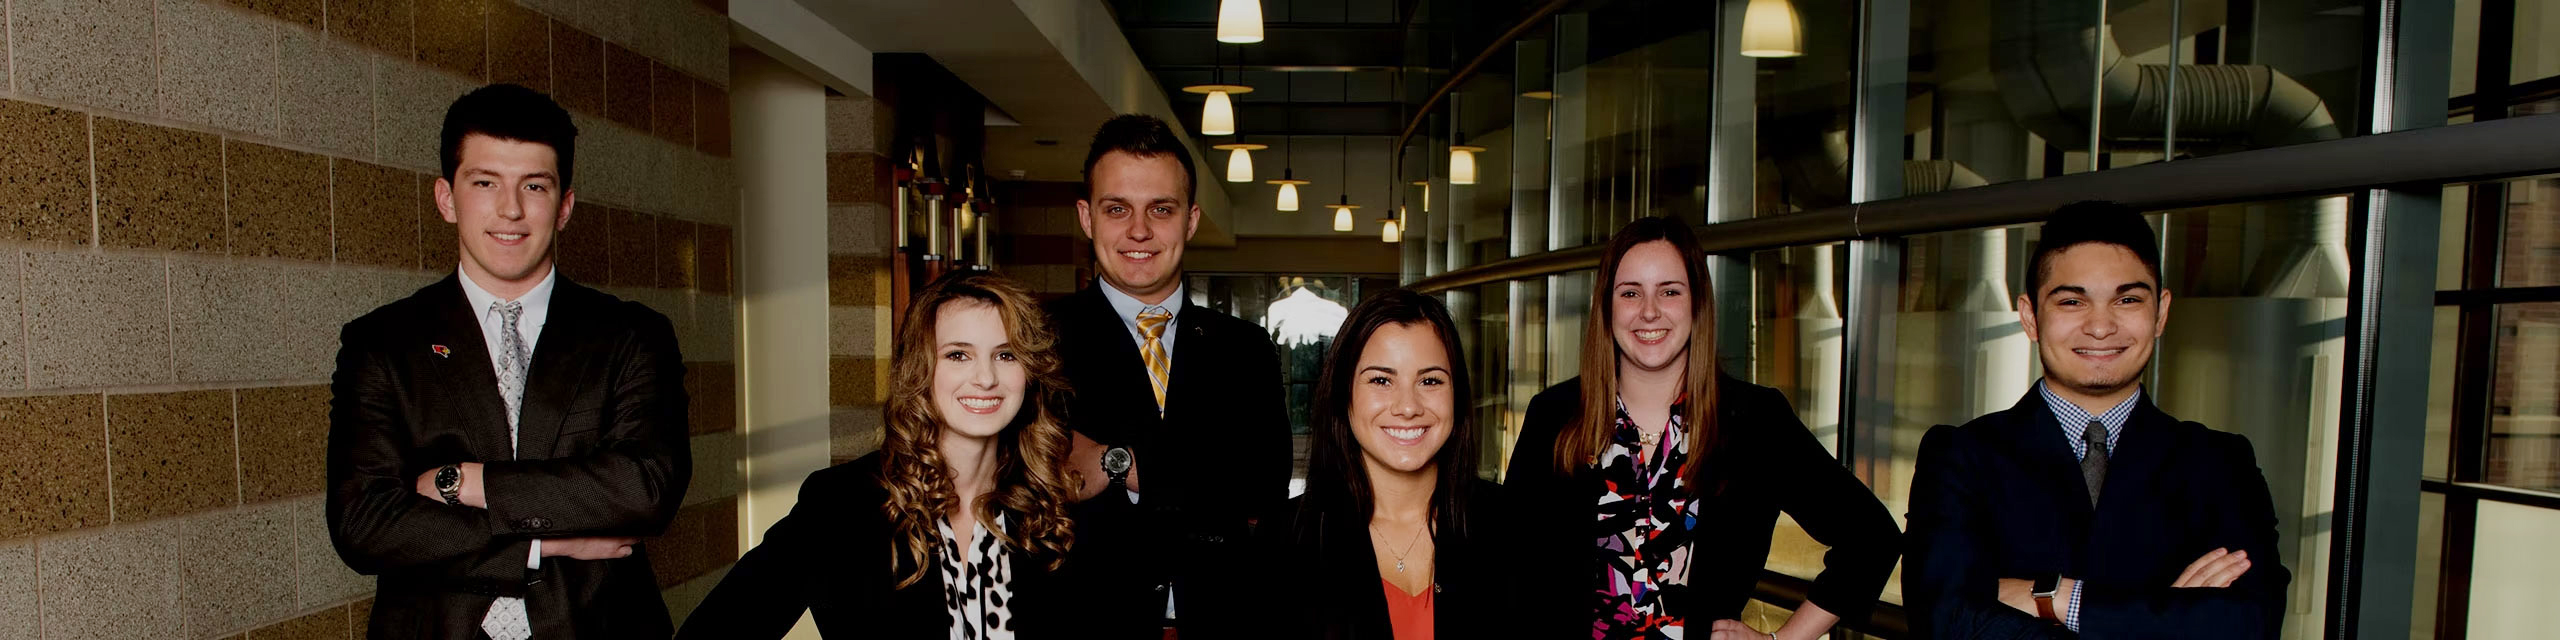 A group of young professional students posing